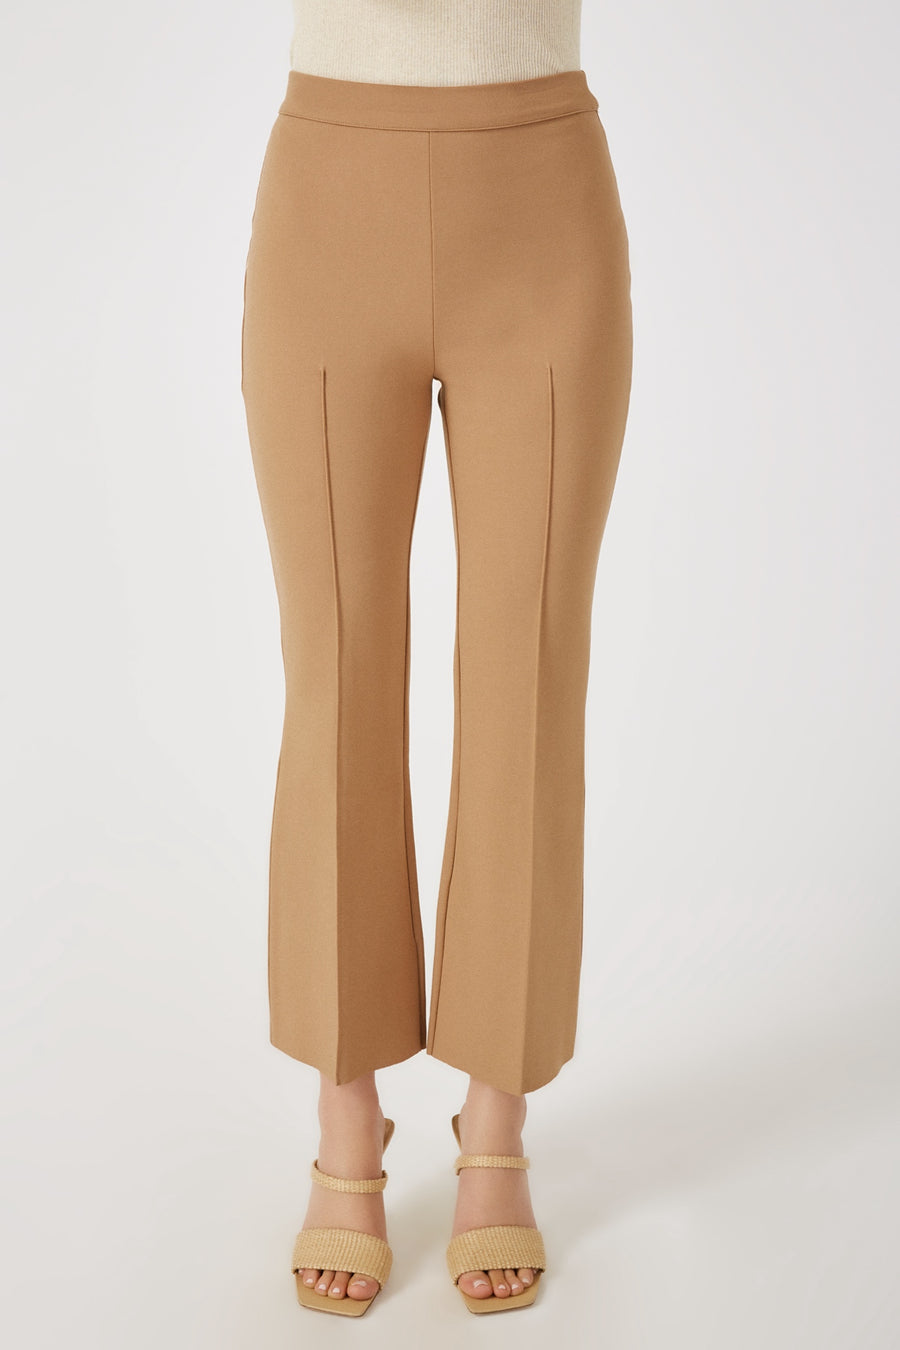 SWATCH THE PORTERFIELD CROP PIN TUCK FLARE PANTS